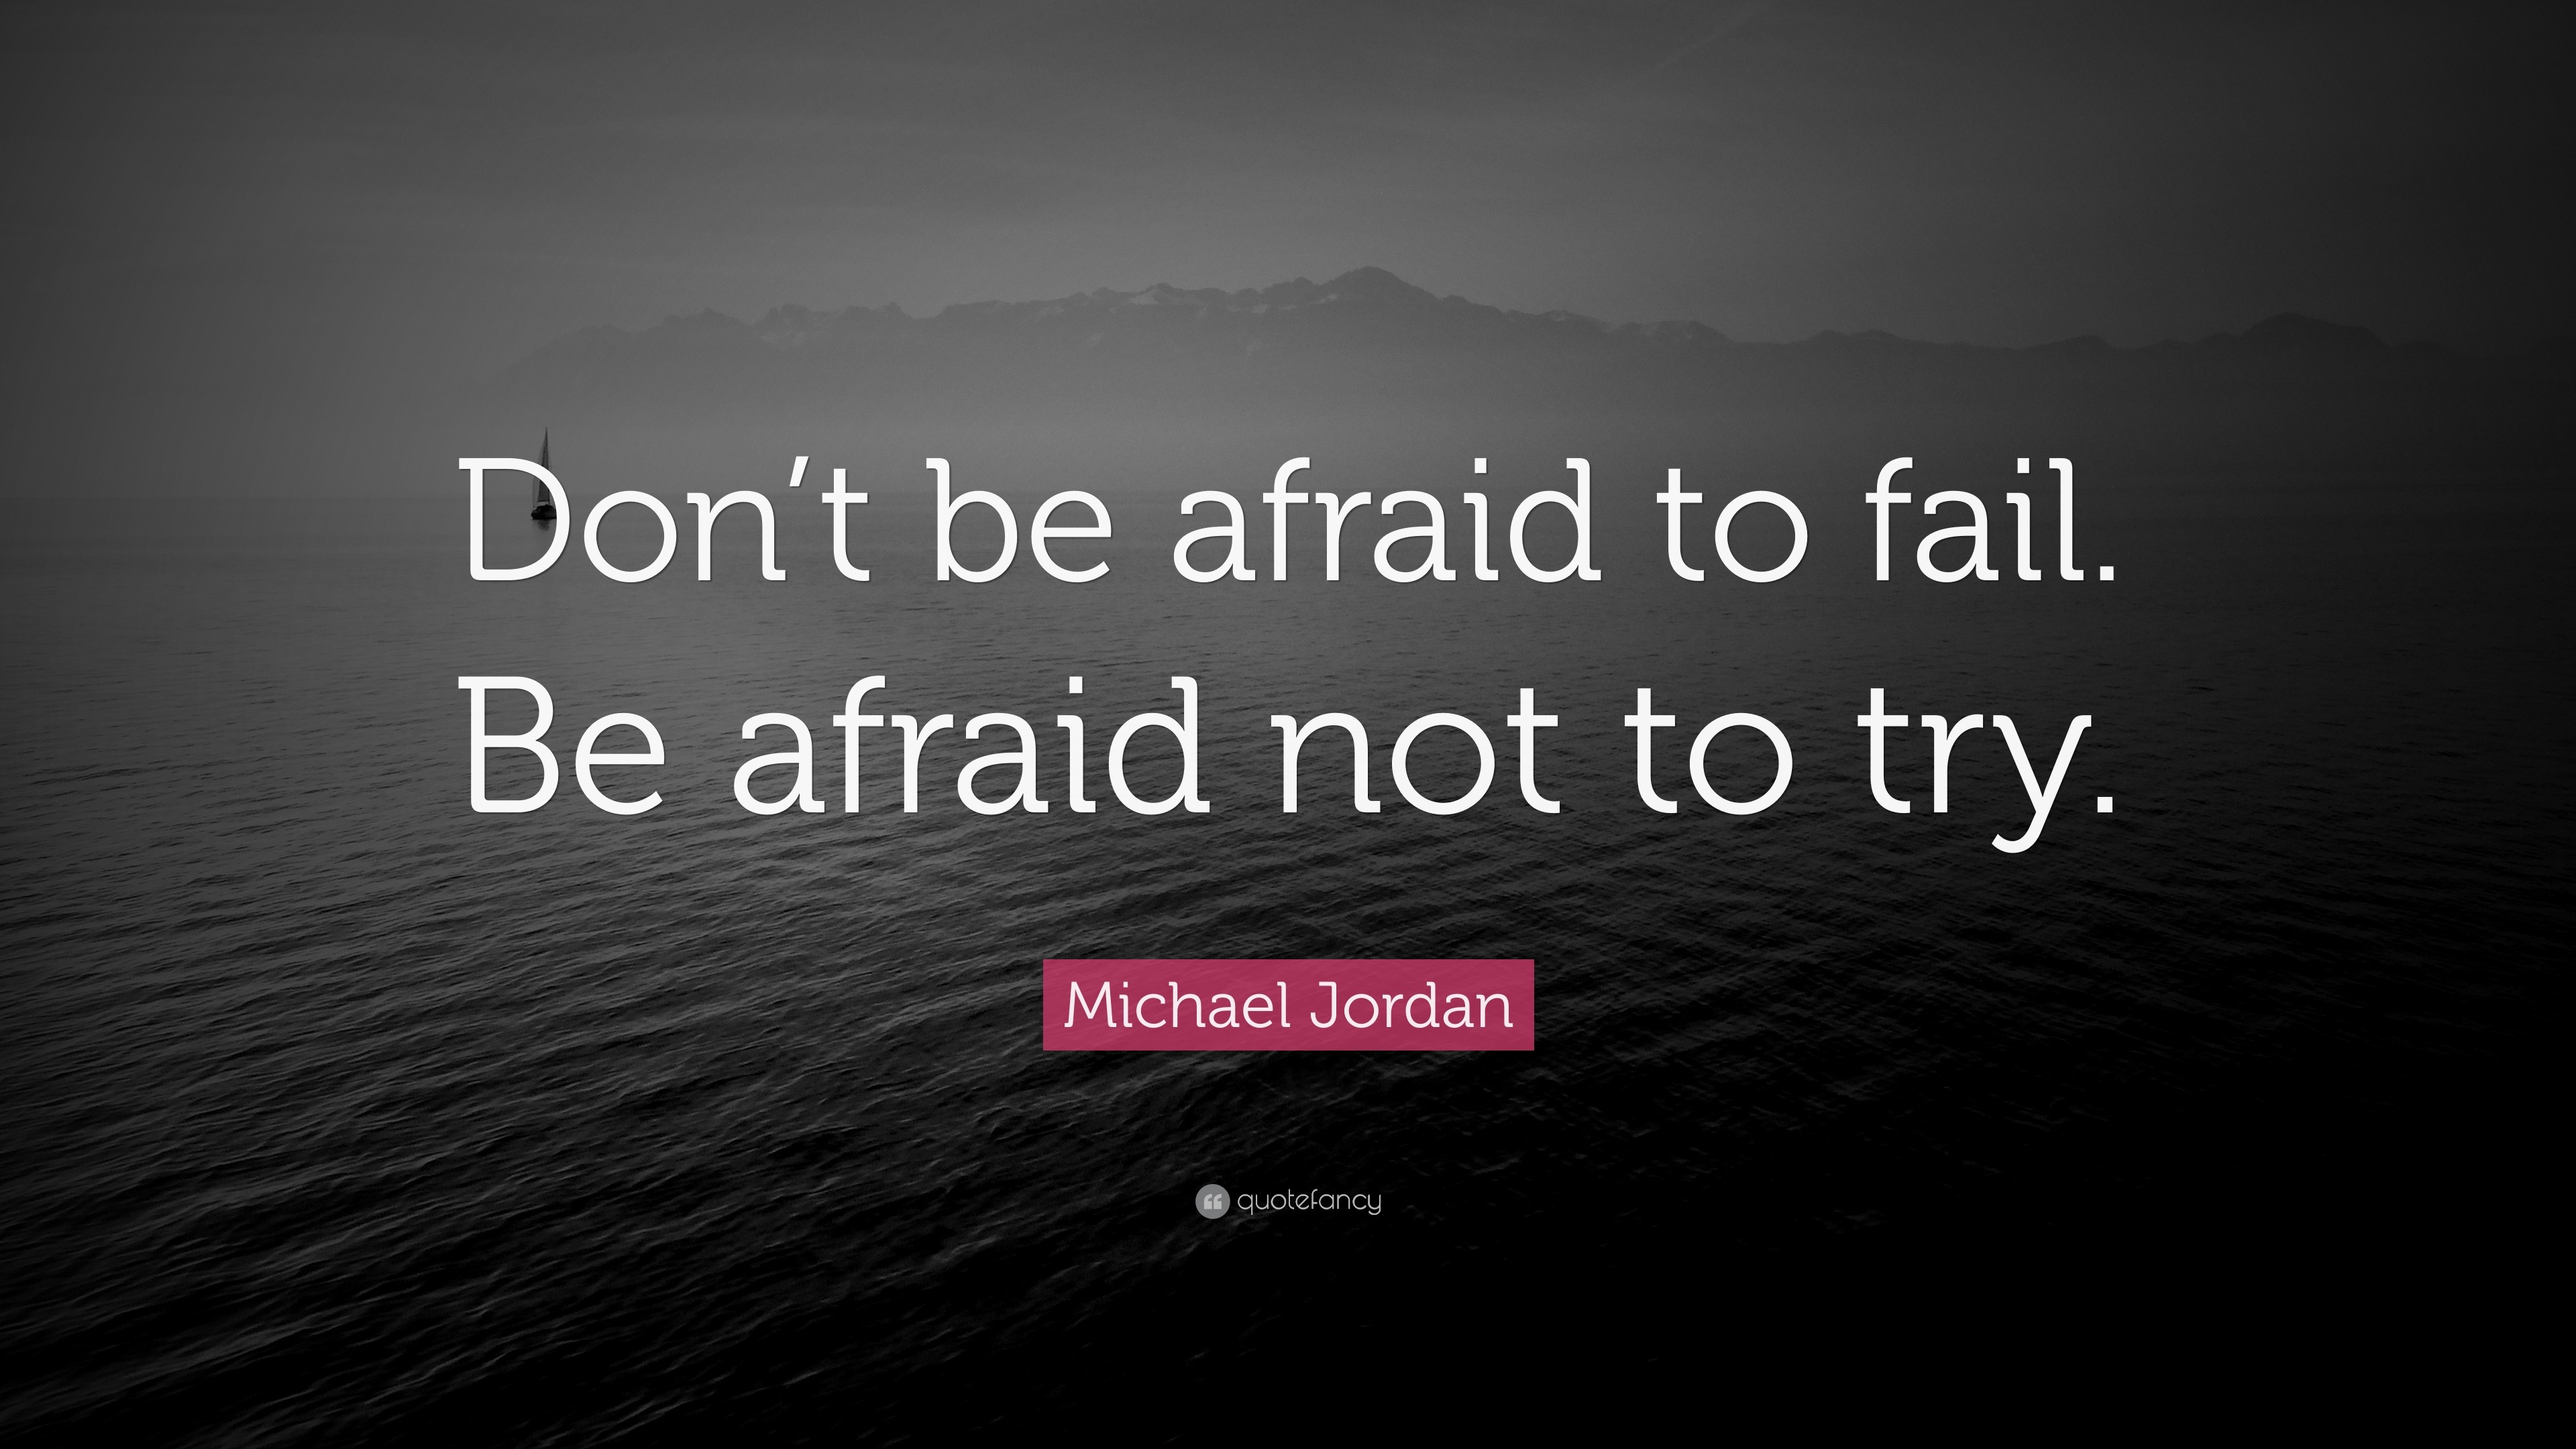 Michael Jordan Quote: “Don’t be afraid to fail. Be afraid not to try.”